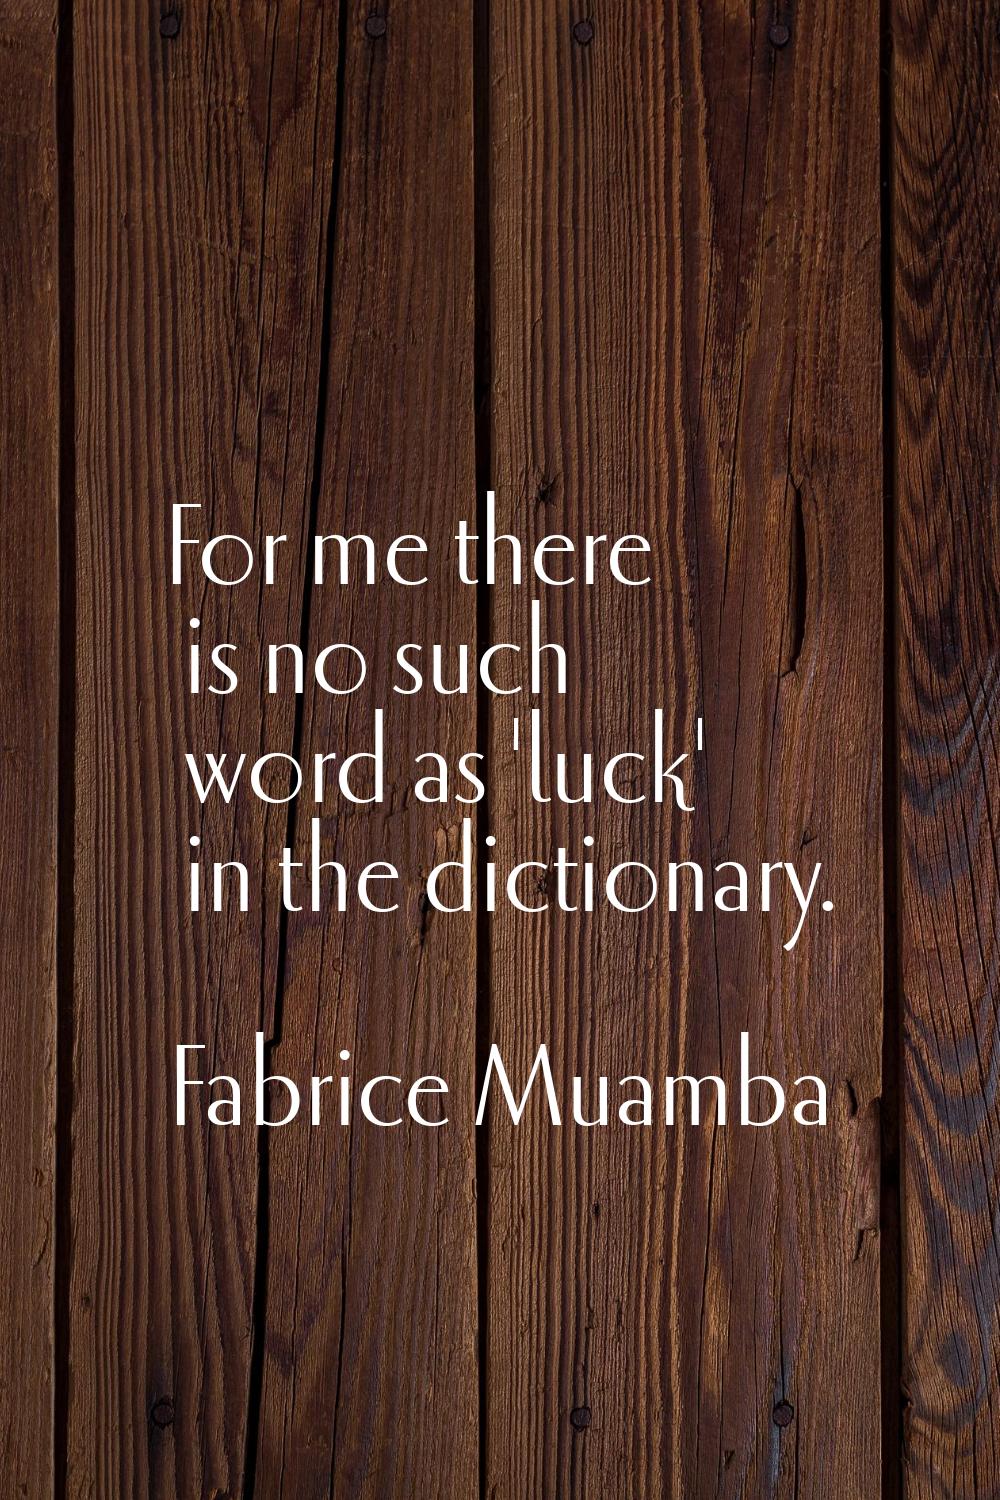 For me there is no such word as 'luck' in the dictionary.